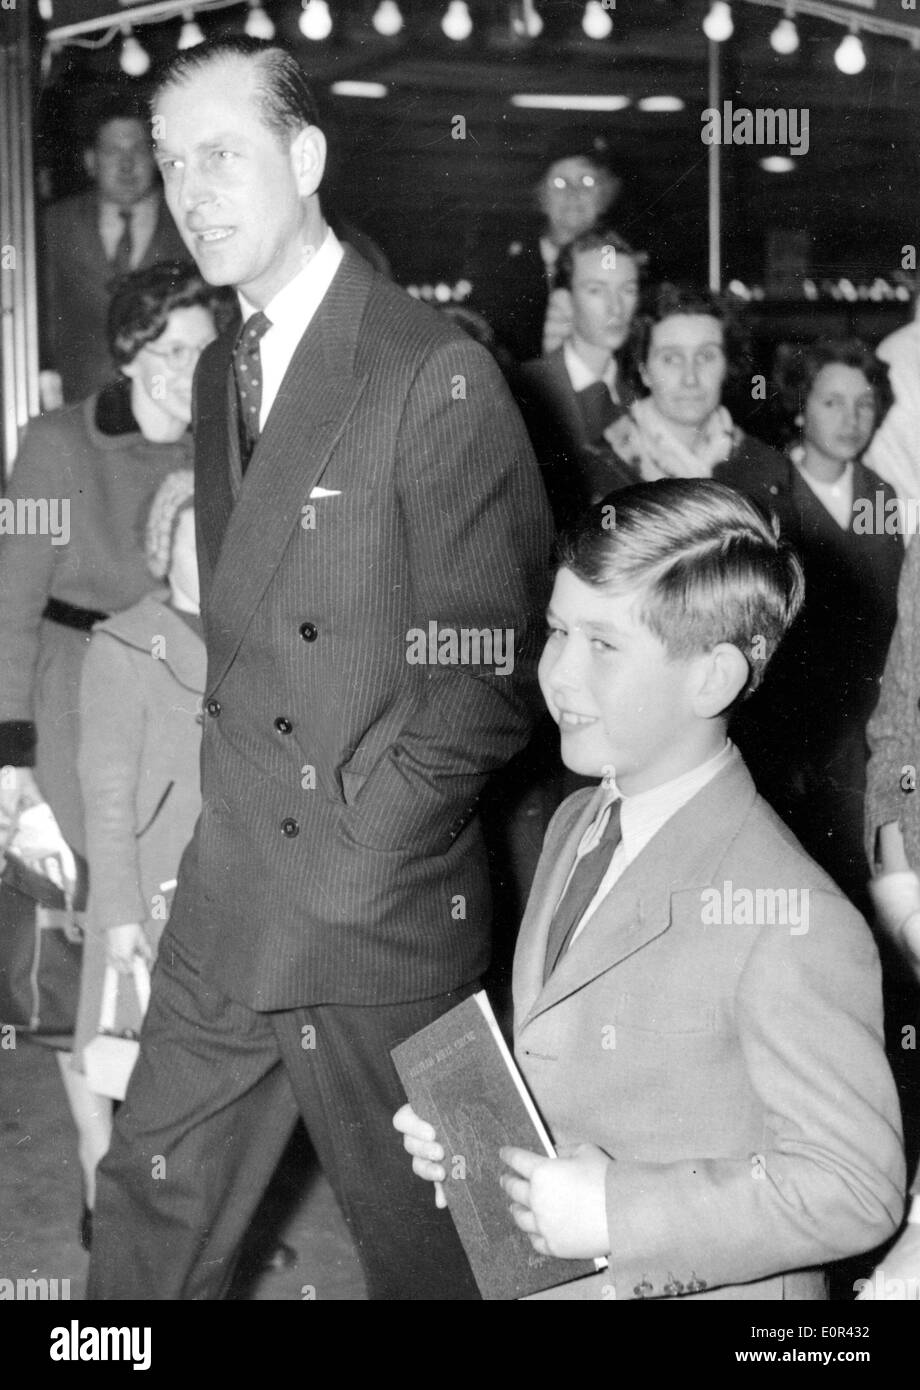 Prince Philip and son Charles go to the circus Stock Photo